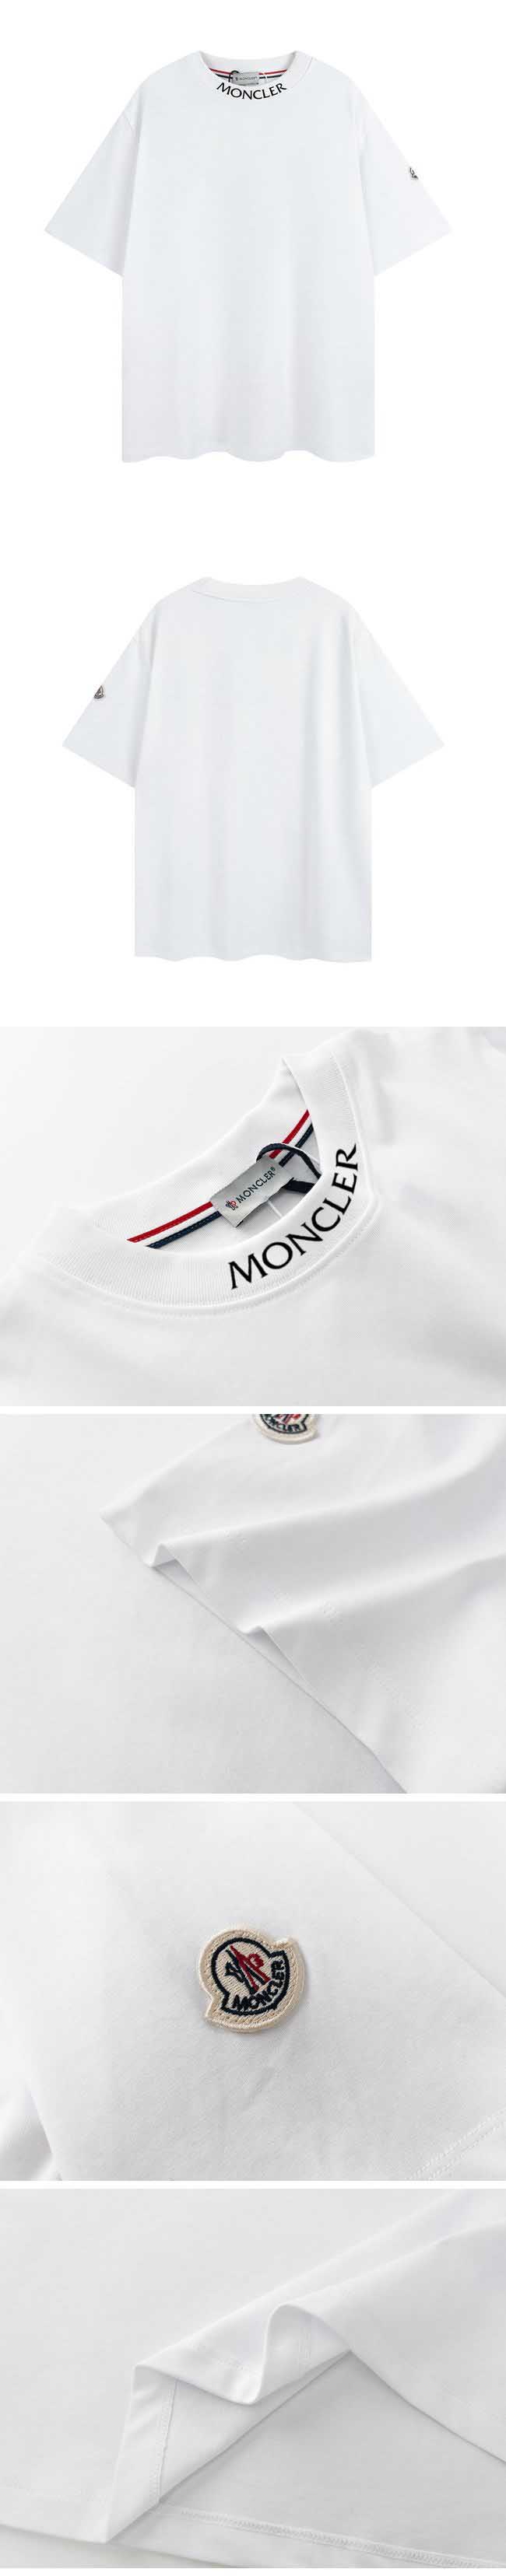 Moncler Neck Letter Tee モンクレール ネックレター Tシャツ ホワイト